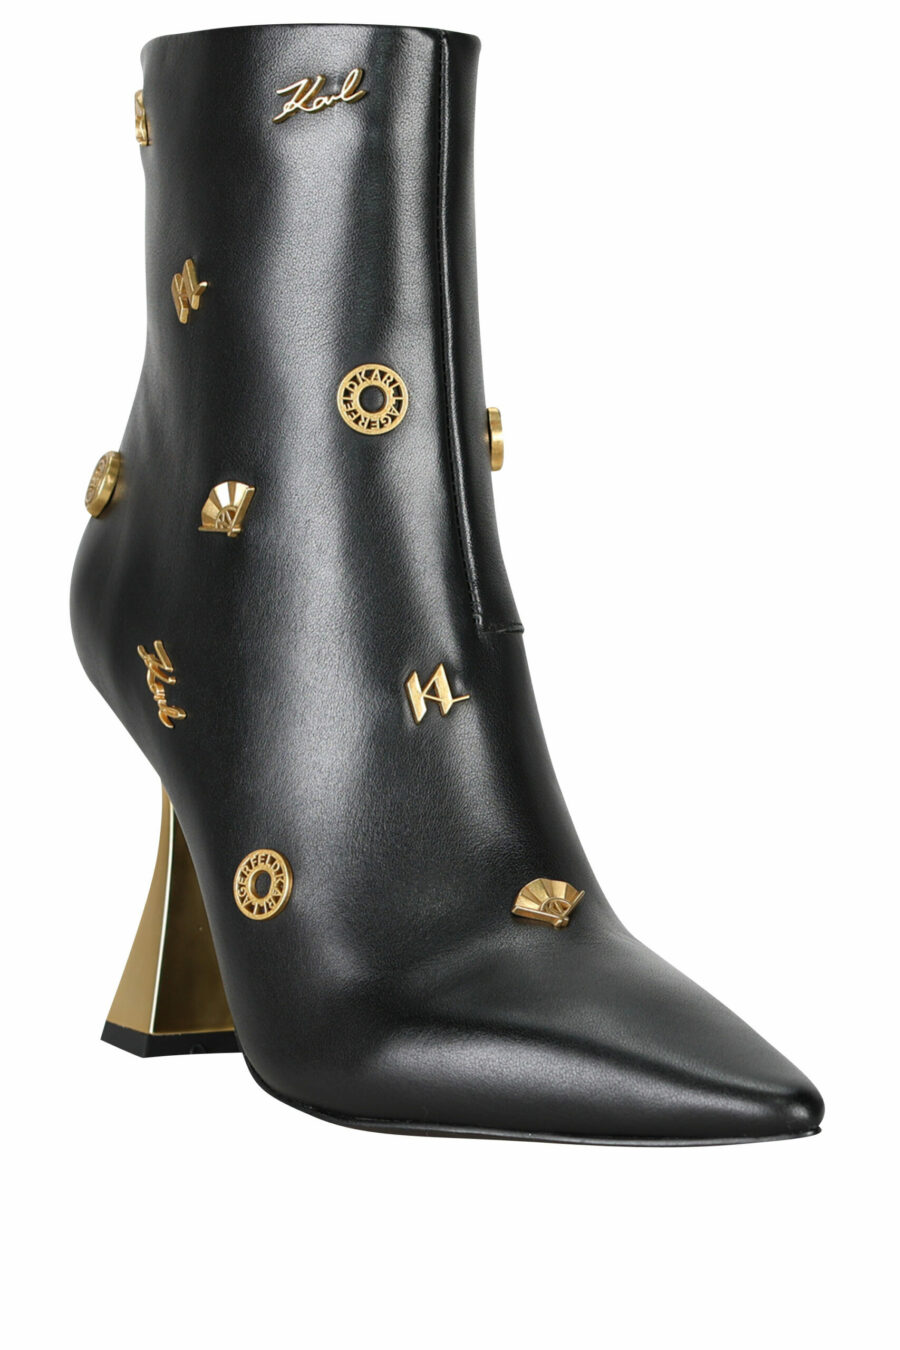 Black ankle boots with gold heel and pins - 505952982034 1 scaled